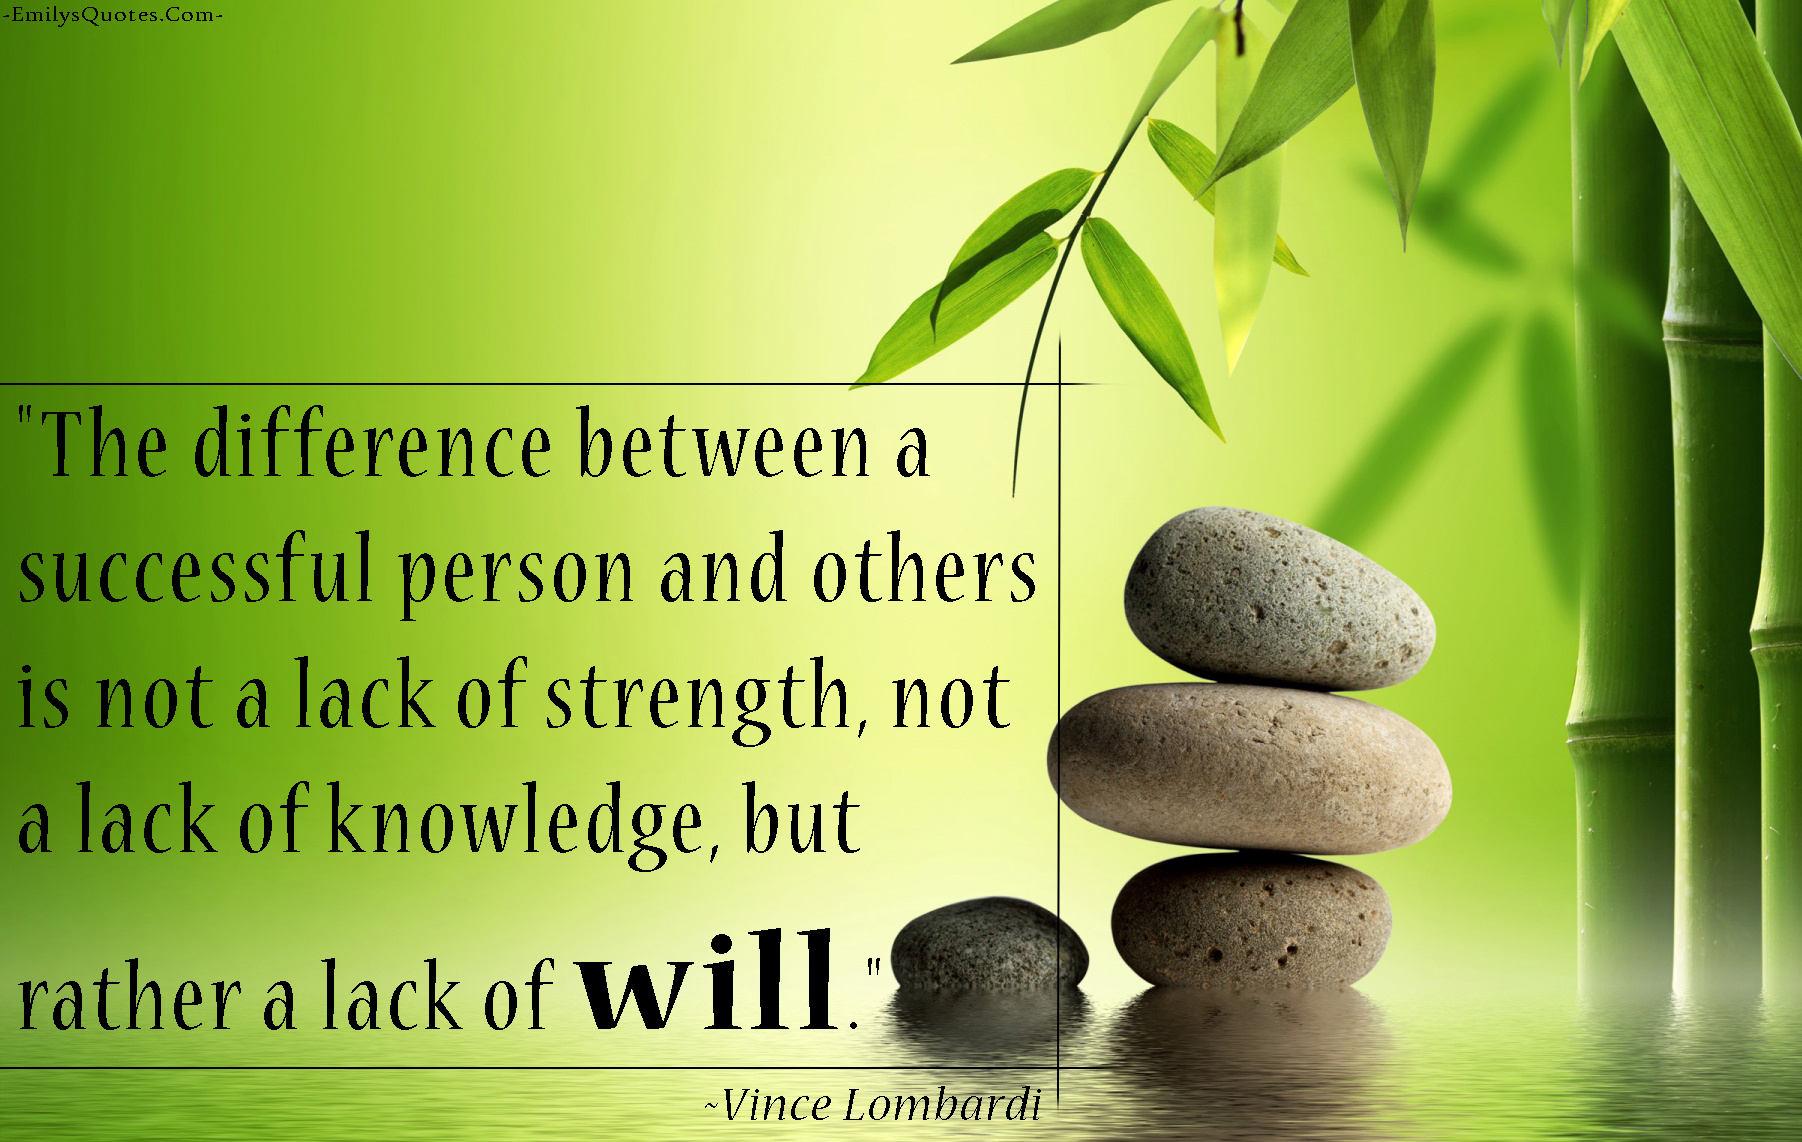 The difference between a successful person and others is not a lack of strength, not a lack of knowledge, but rather a lack of will